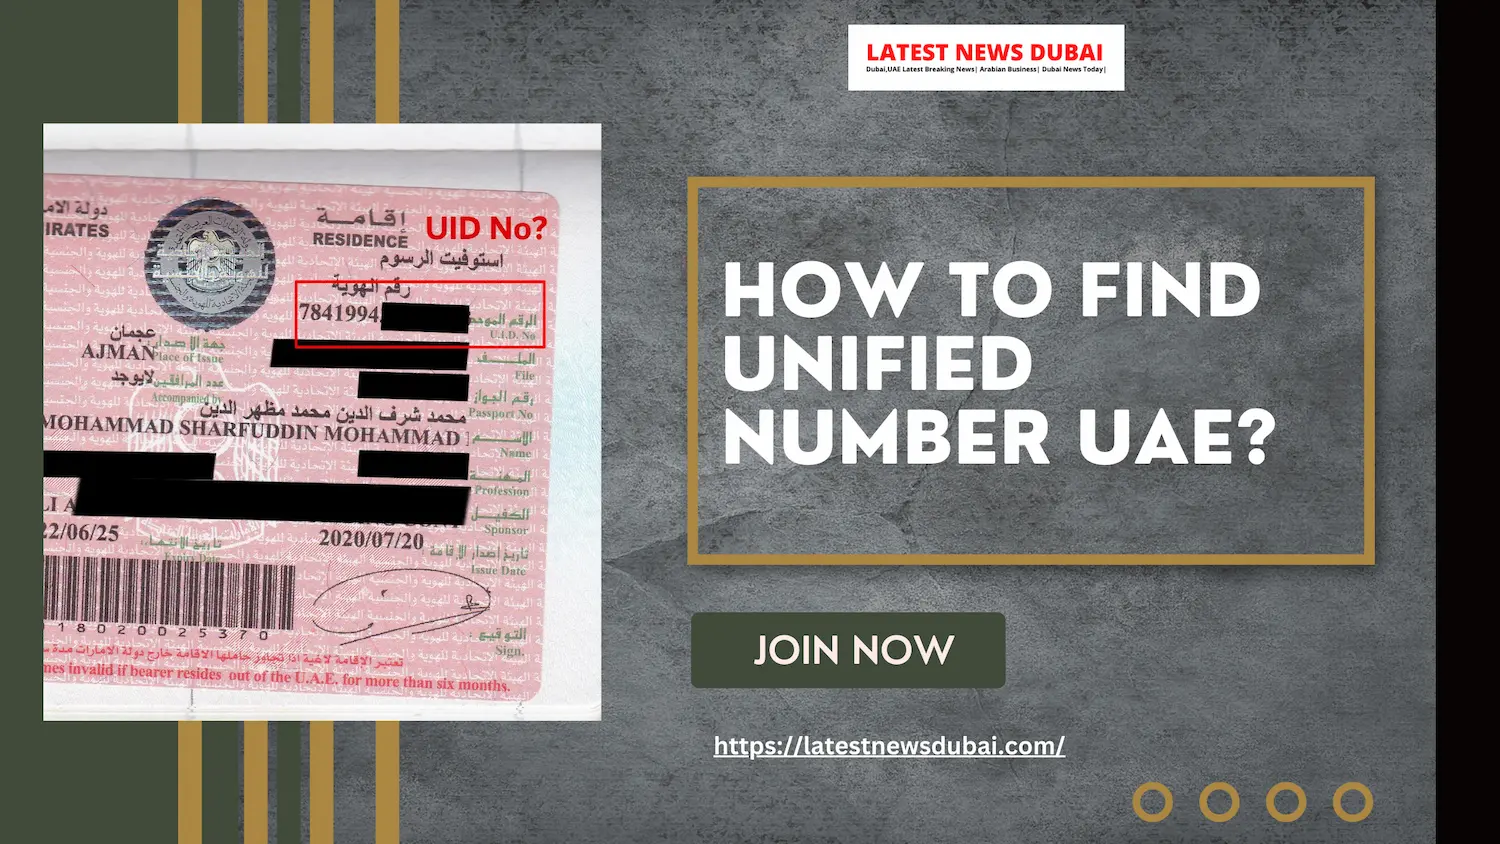 Find a Unified Number for UAE